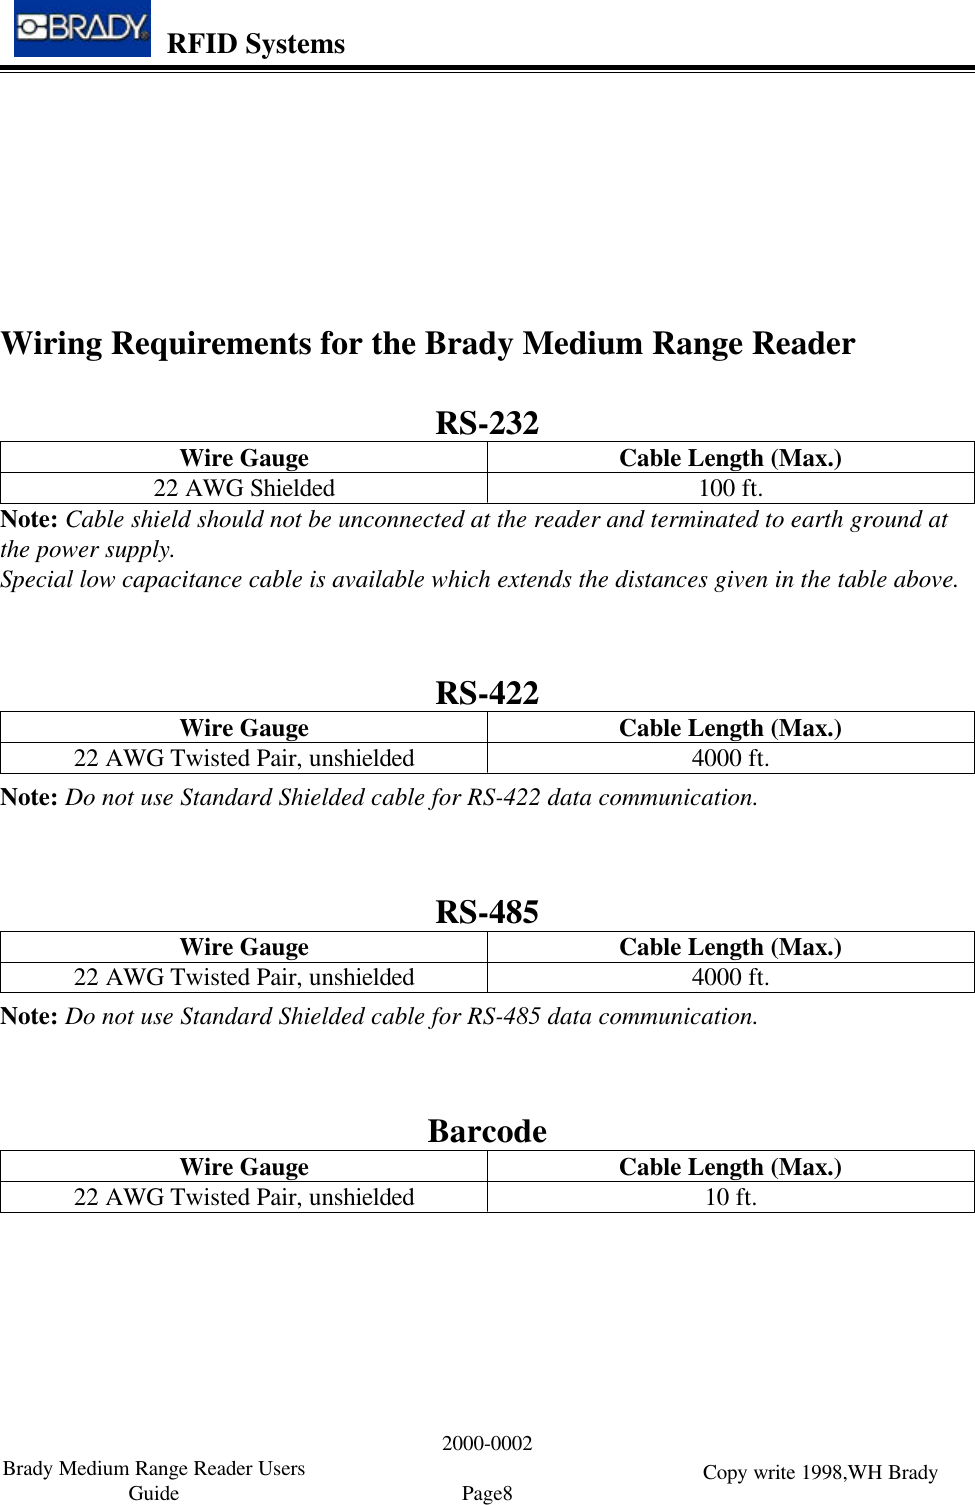 Wiring Requirements for the Brady Medium Range ReaderRS-232100 ft.22 AWG Shielded Cable Length (Max.)Wire GaugeNote: Cable shield should not be unconnected at the reader and terminated to earth ground atthe power supply. Special low capacitance cable is available which extends the distances given in the table above.  RS-4224000 ft.22 AWG Twisted Pair, unshielded Cable Length (Max.)Wire GaugeNote: Do not use Standard Shielded cable for RS-422 data communication.RS-4854000 ft.22 AWG Twisted Pair, unshielded Cable Length (Max.)Wire GaugeNote: Do not use Standard Shielded cable for RS-485 data communication.Barcode10 ft.22 AWG Twisted Pair, unshielded Cable Length (Max.)Wire GaugeRFID SystemsBrady Medium Range Reader UsersGuide2000-0002Page8 Copy write 1998,WH Brady